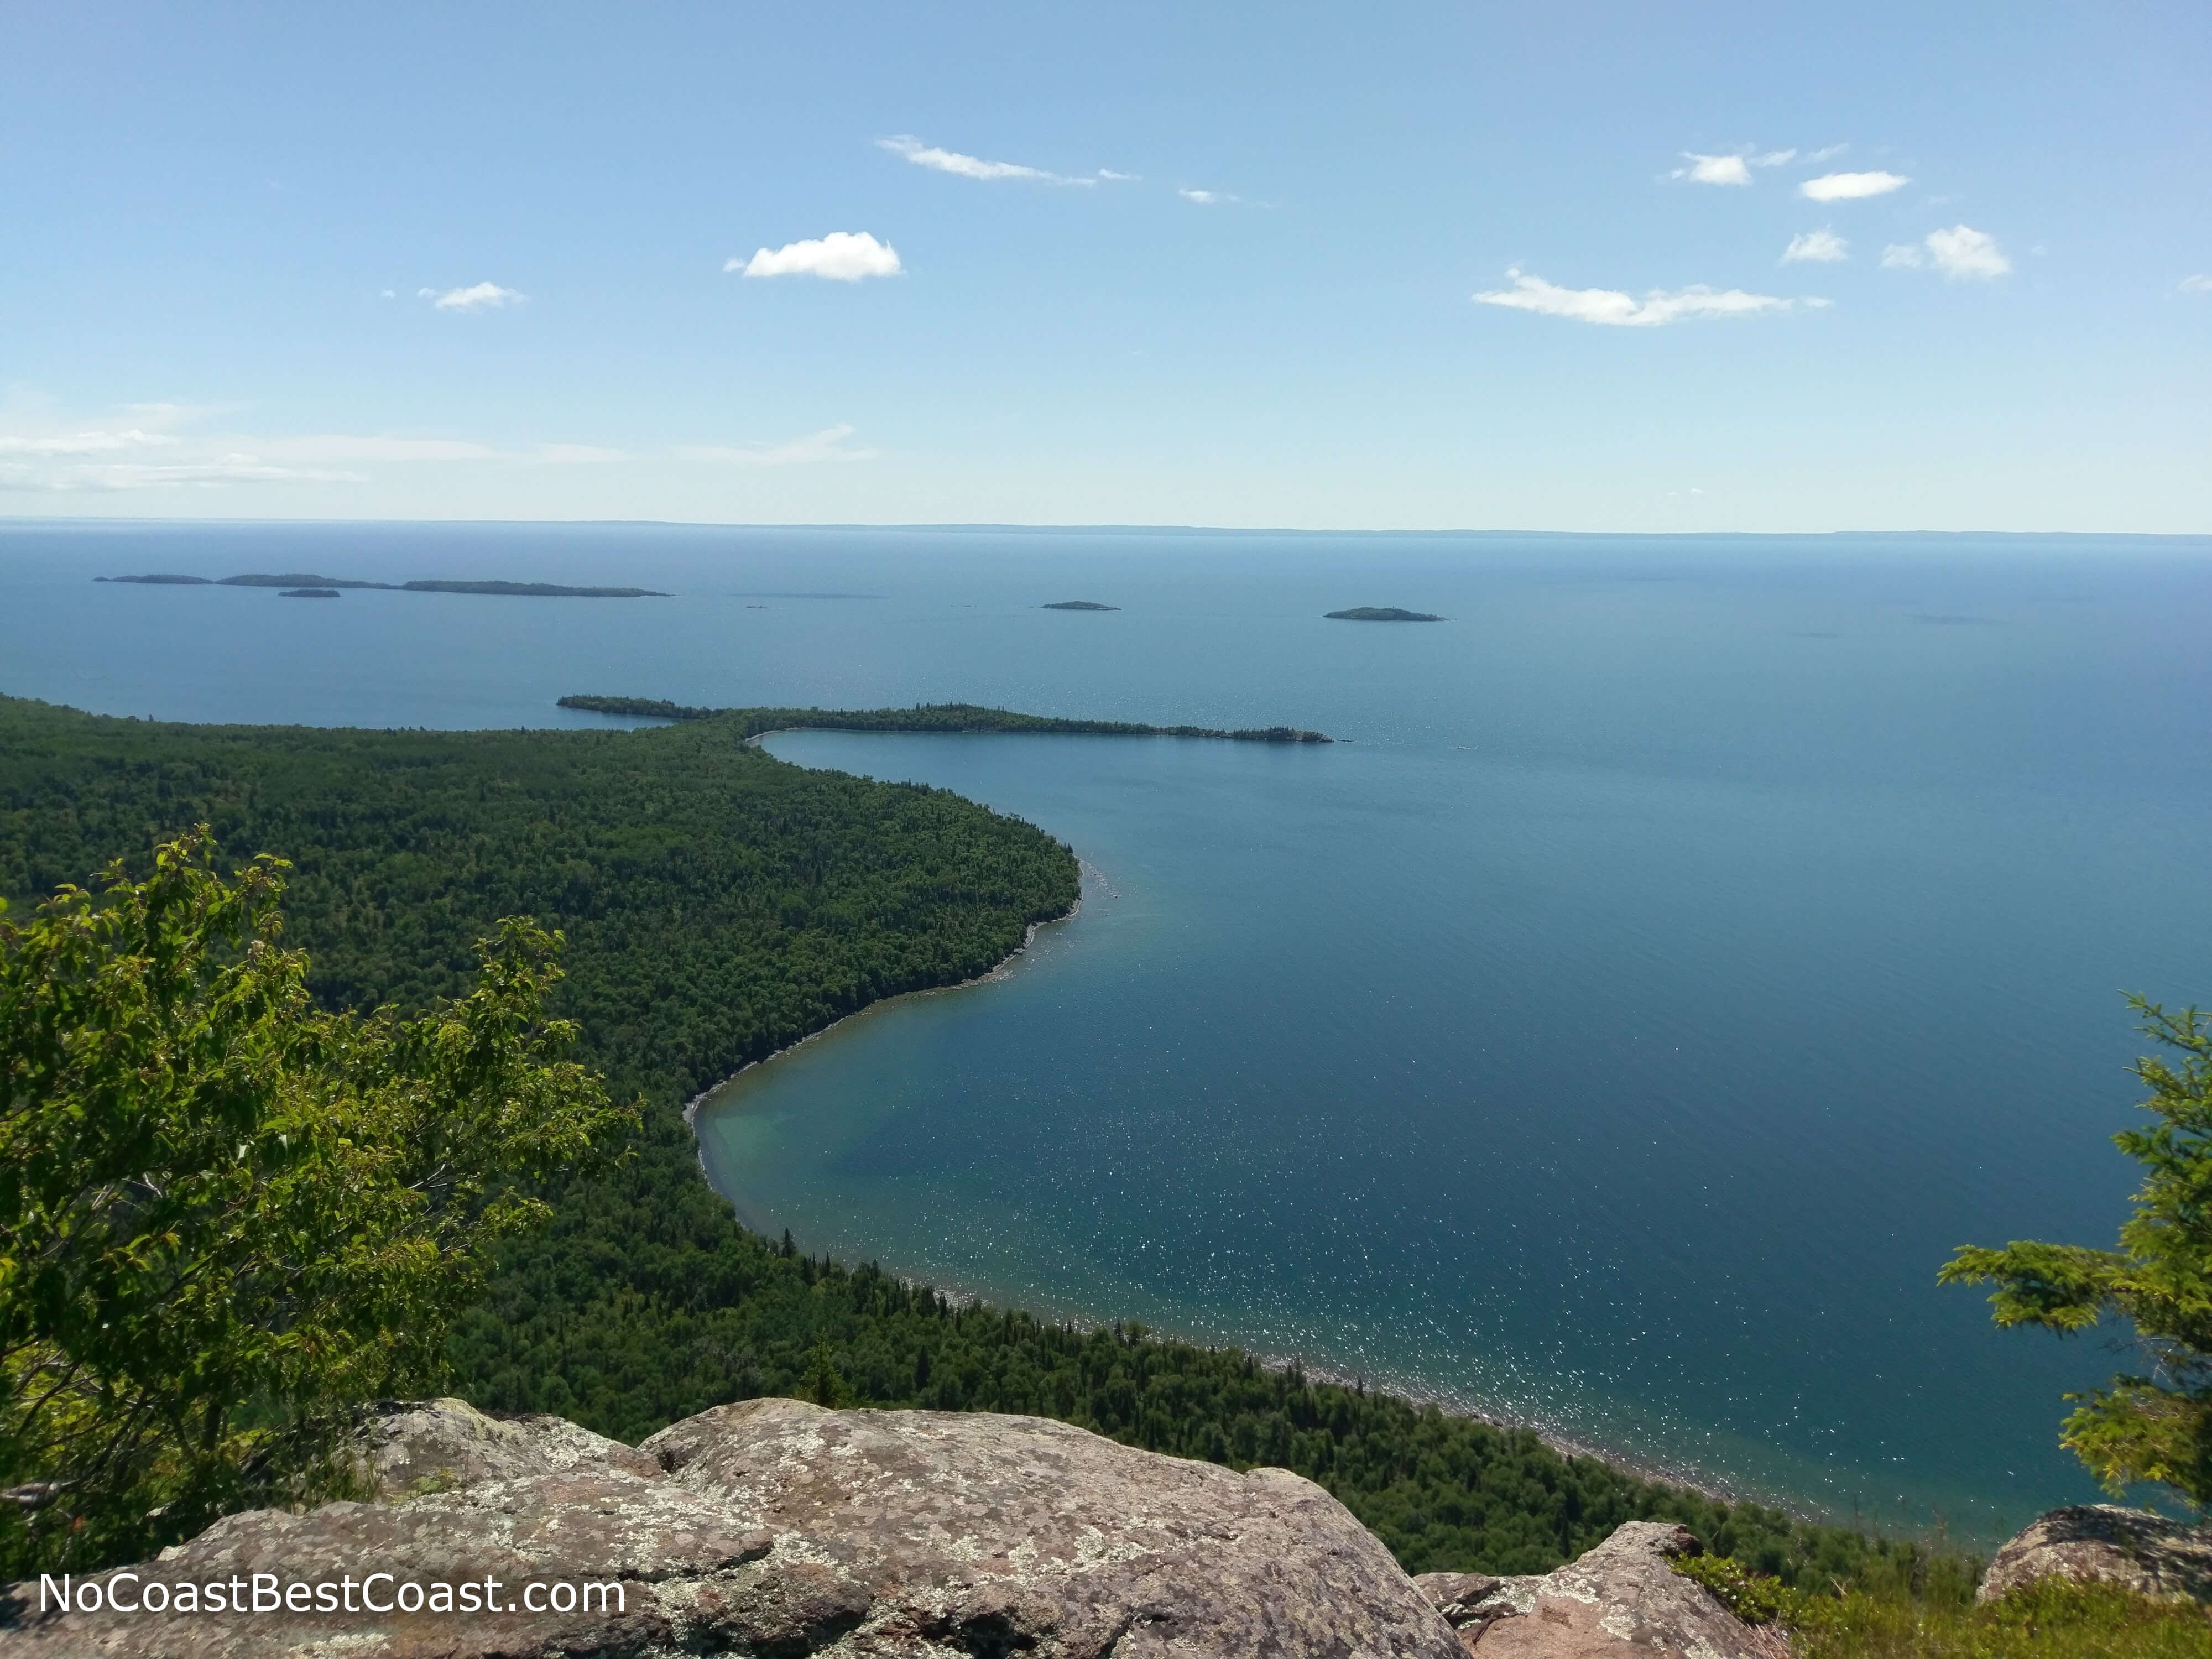 Tee Harbor jutting out into Lake Superior as seen from the Top of the Giant